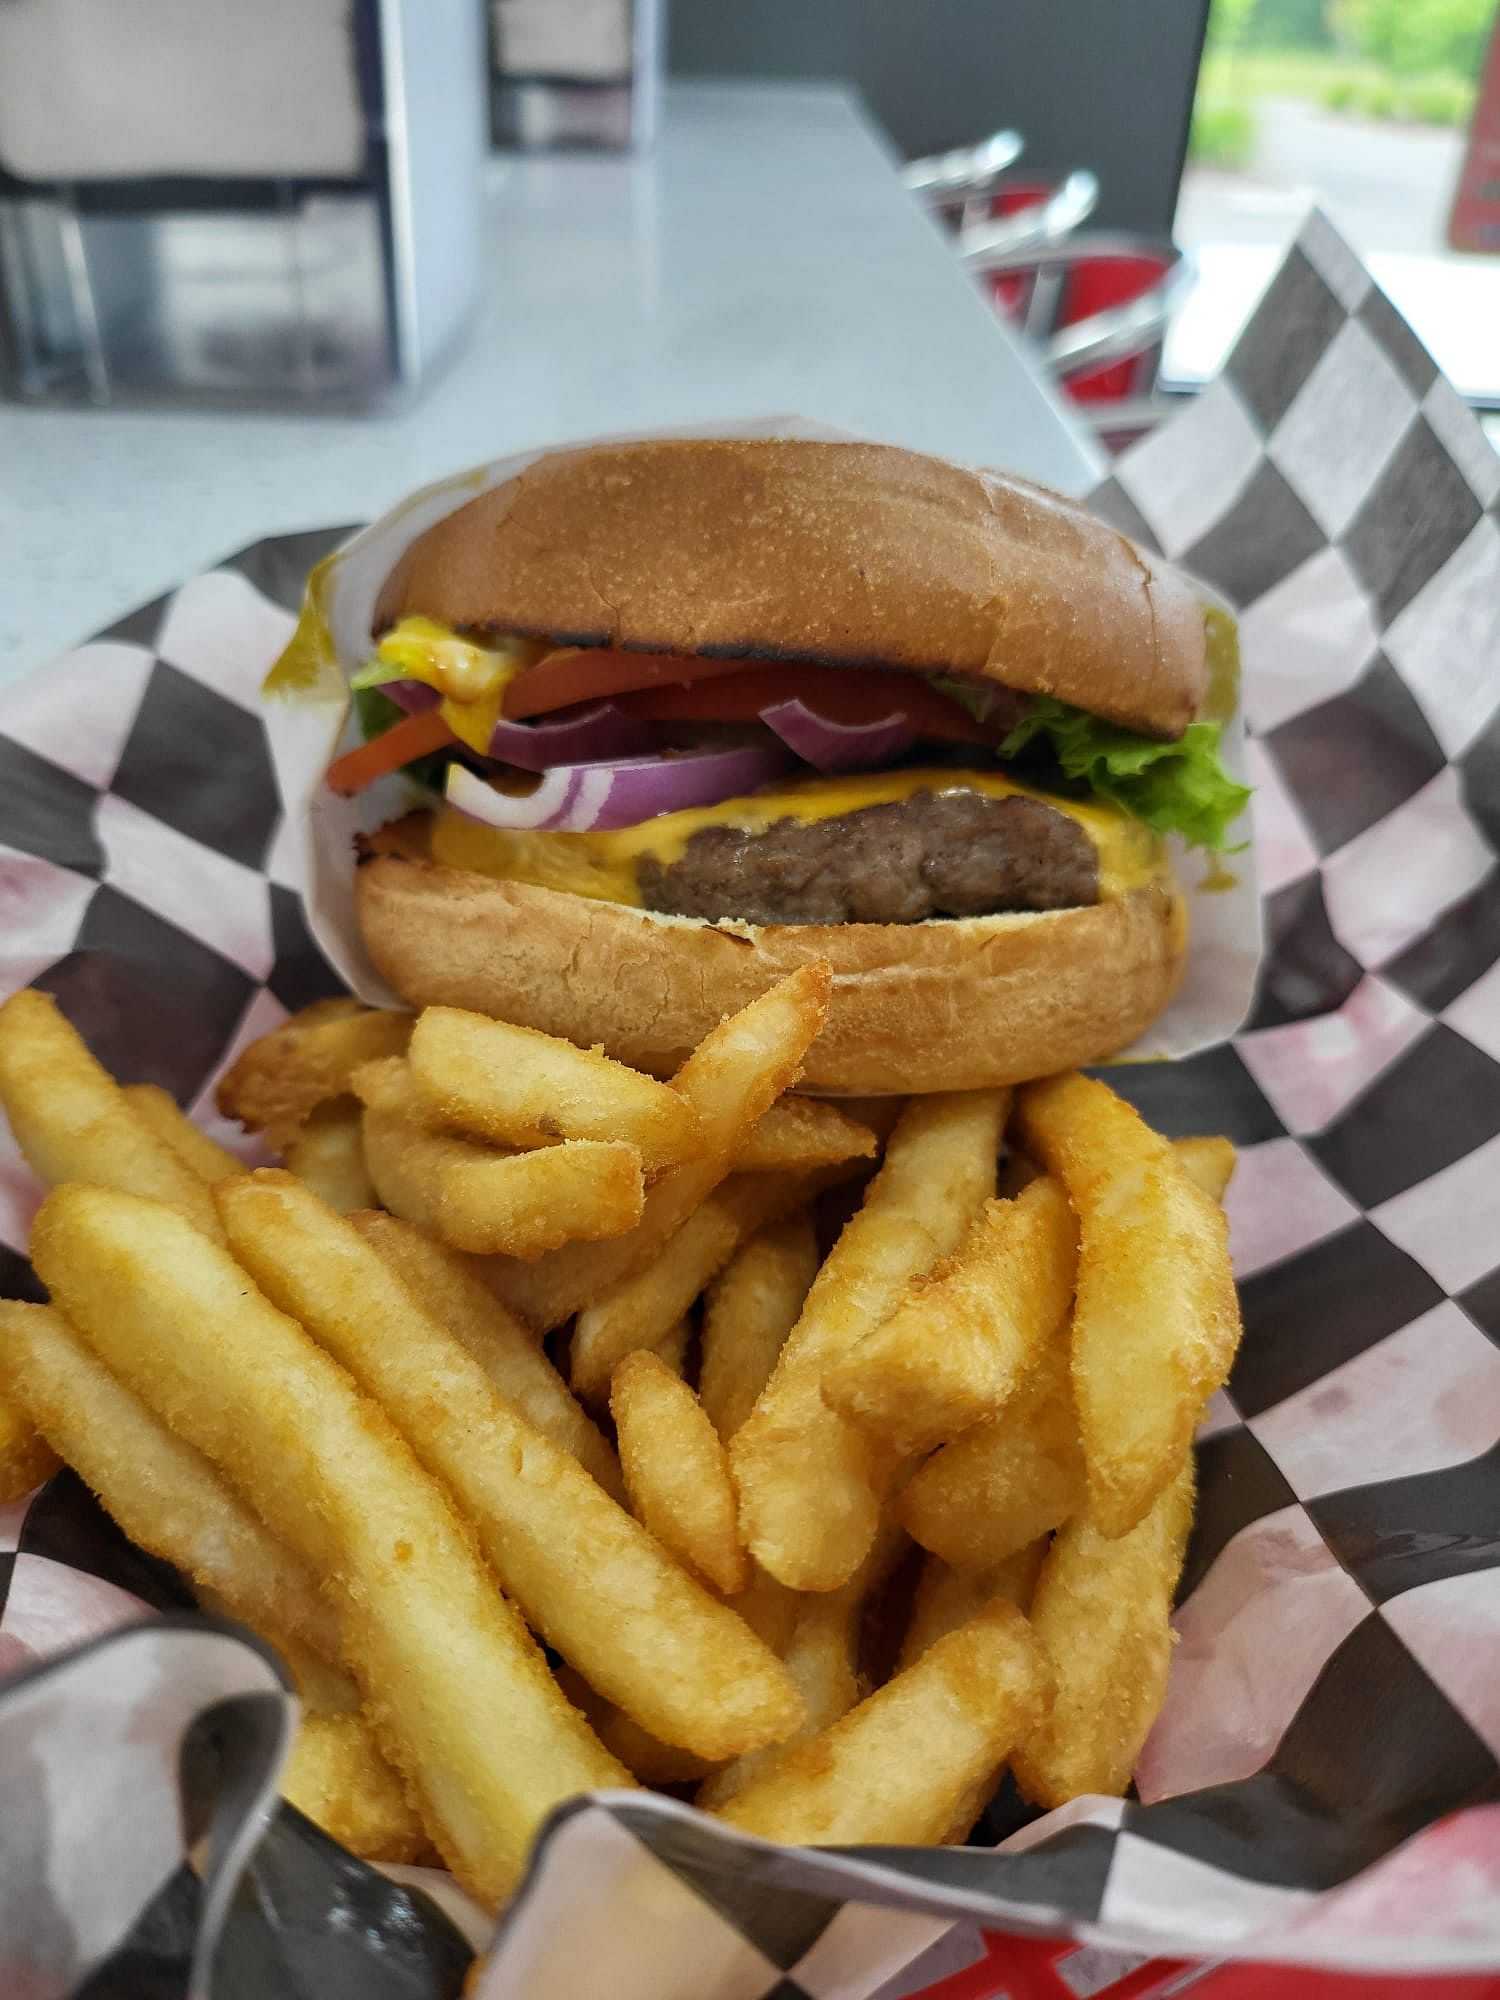 Burger with lettuce, cheese, tomato, and onions, served with crispy fries in a checkered basket.